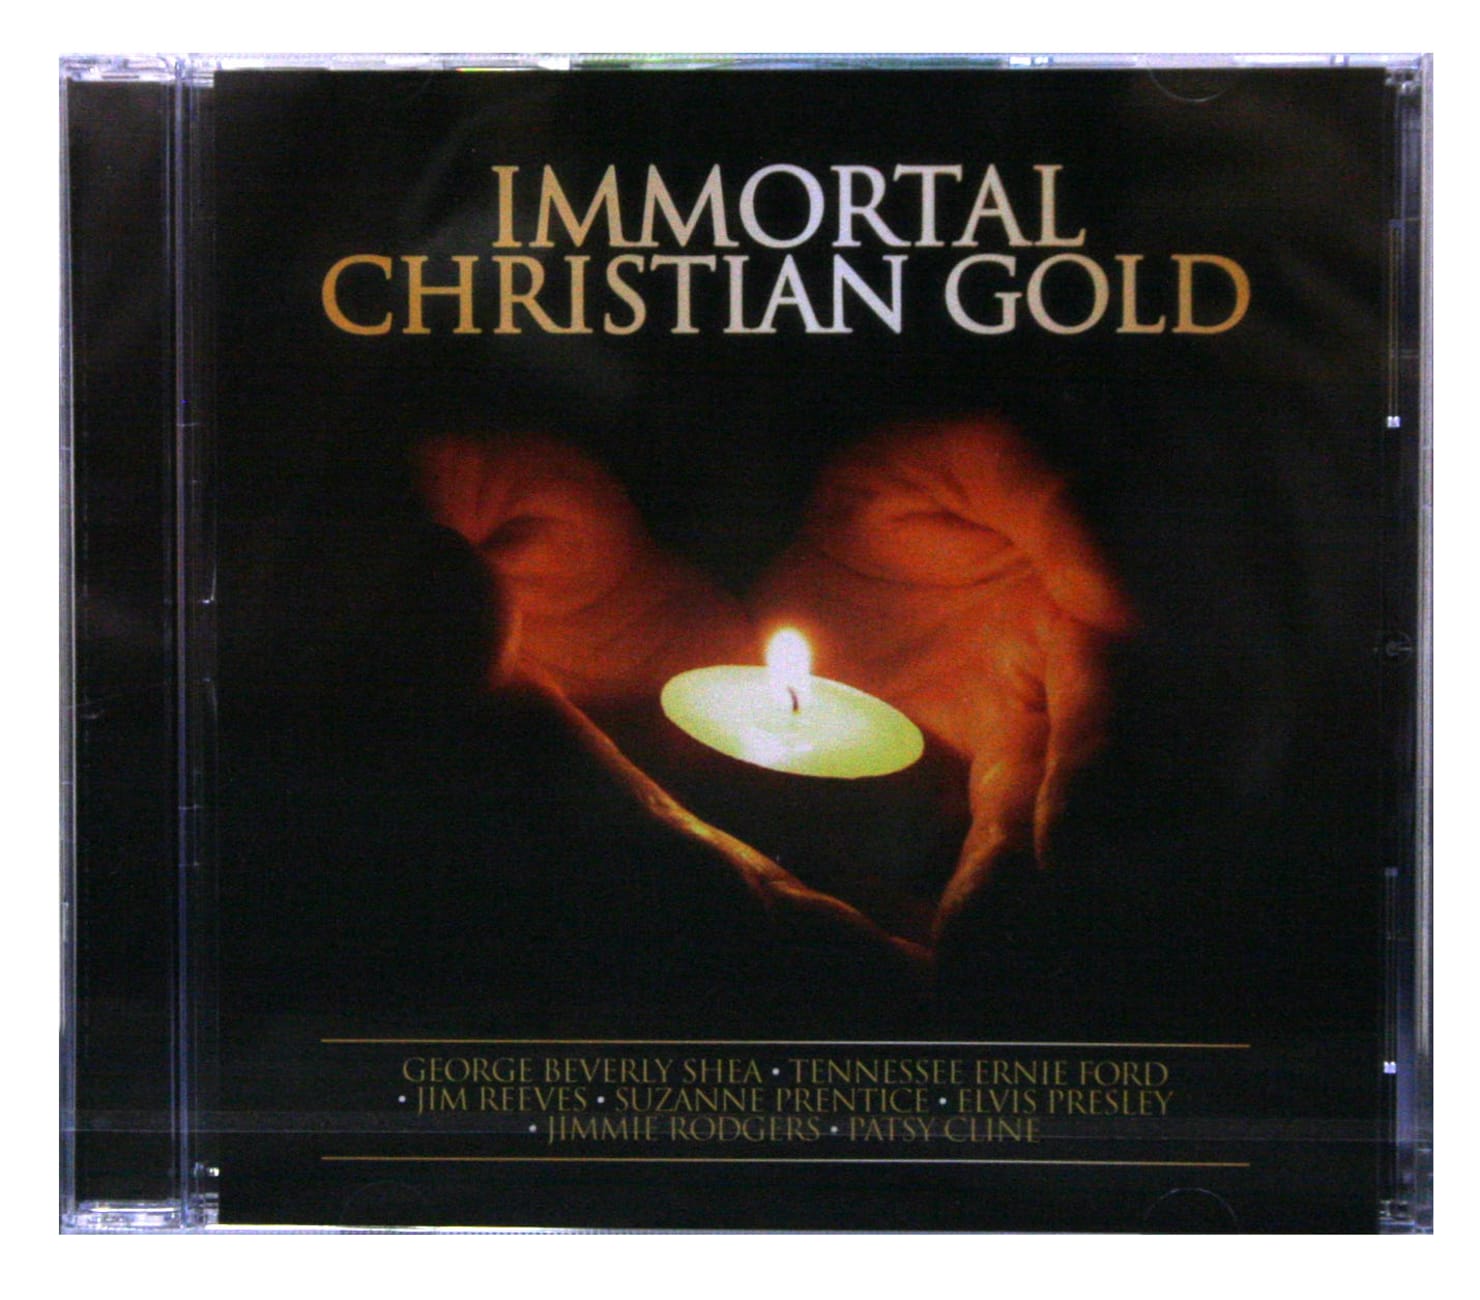 Immortal Christian Gold Compact Disc